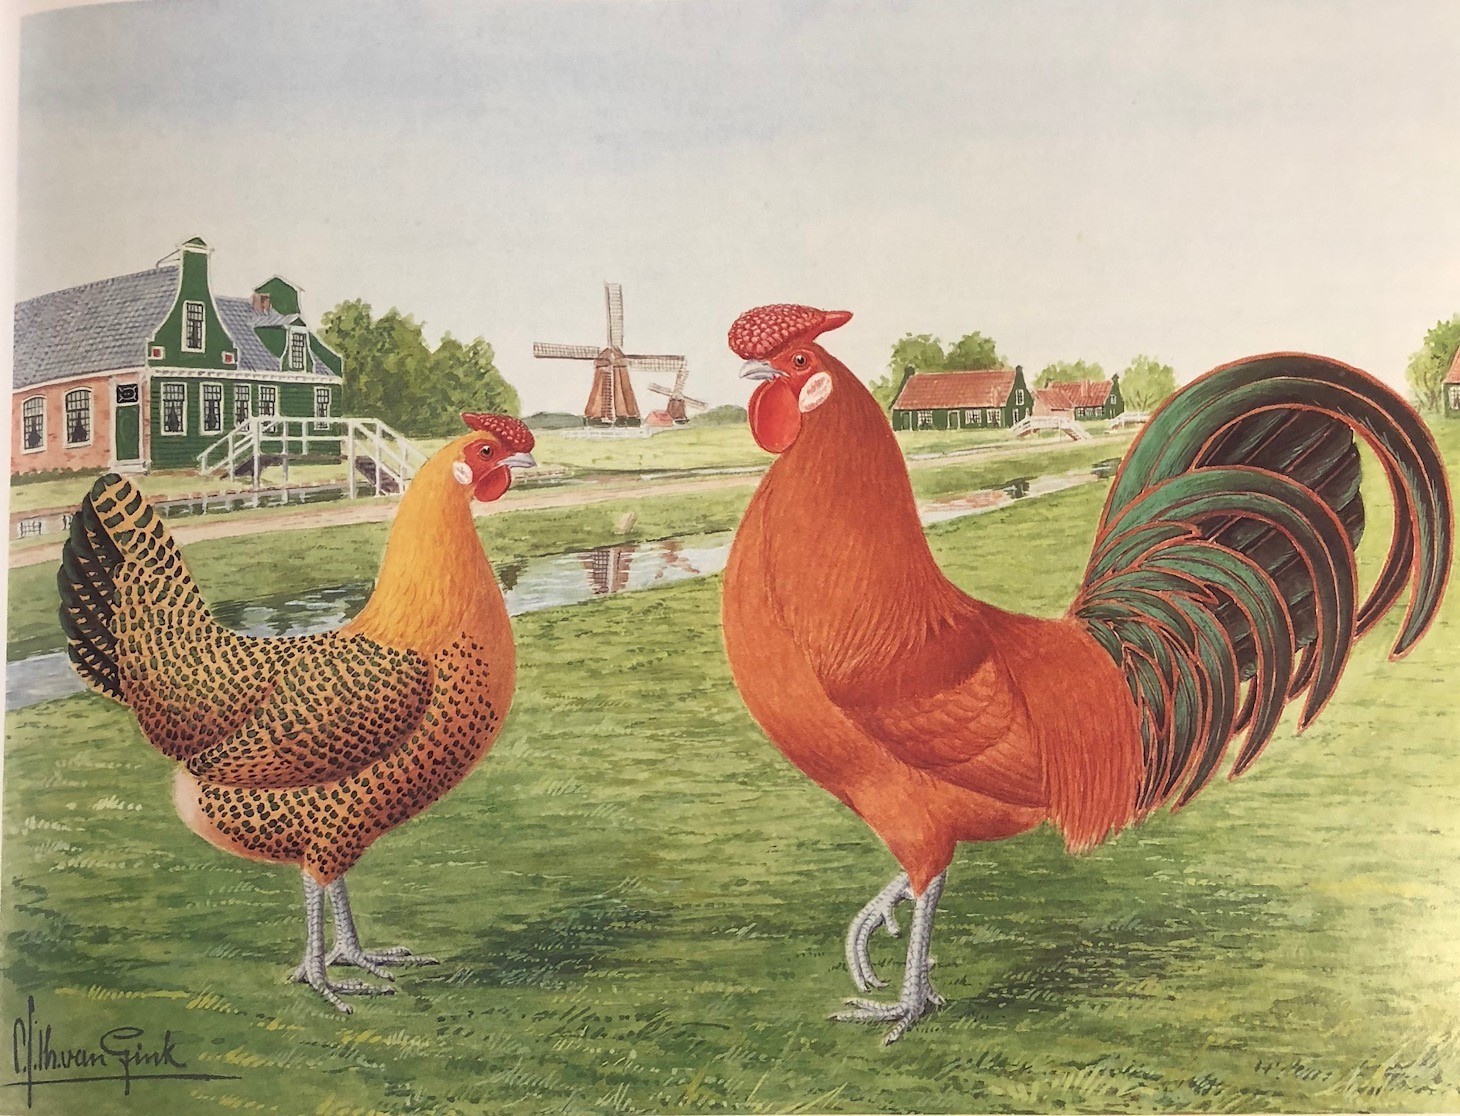 Colour illustration showing two chickens in front of a canal and windmill